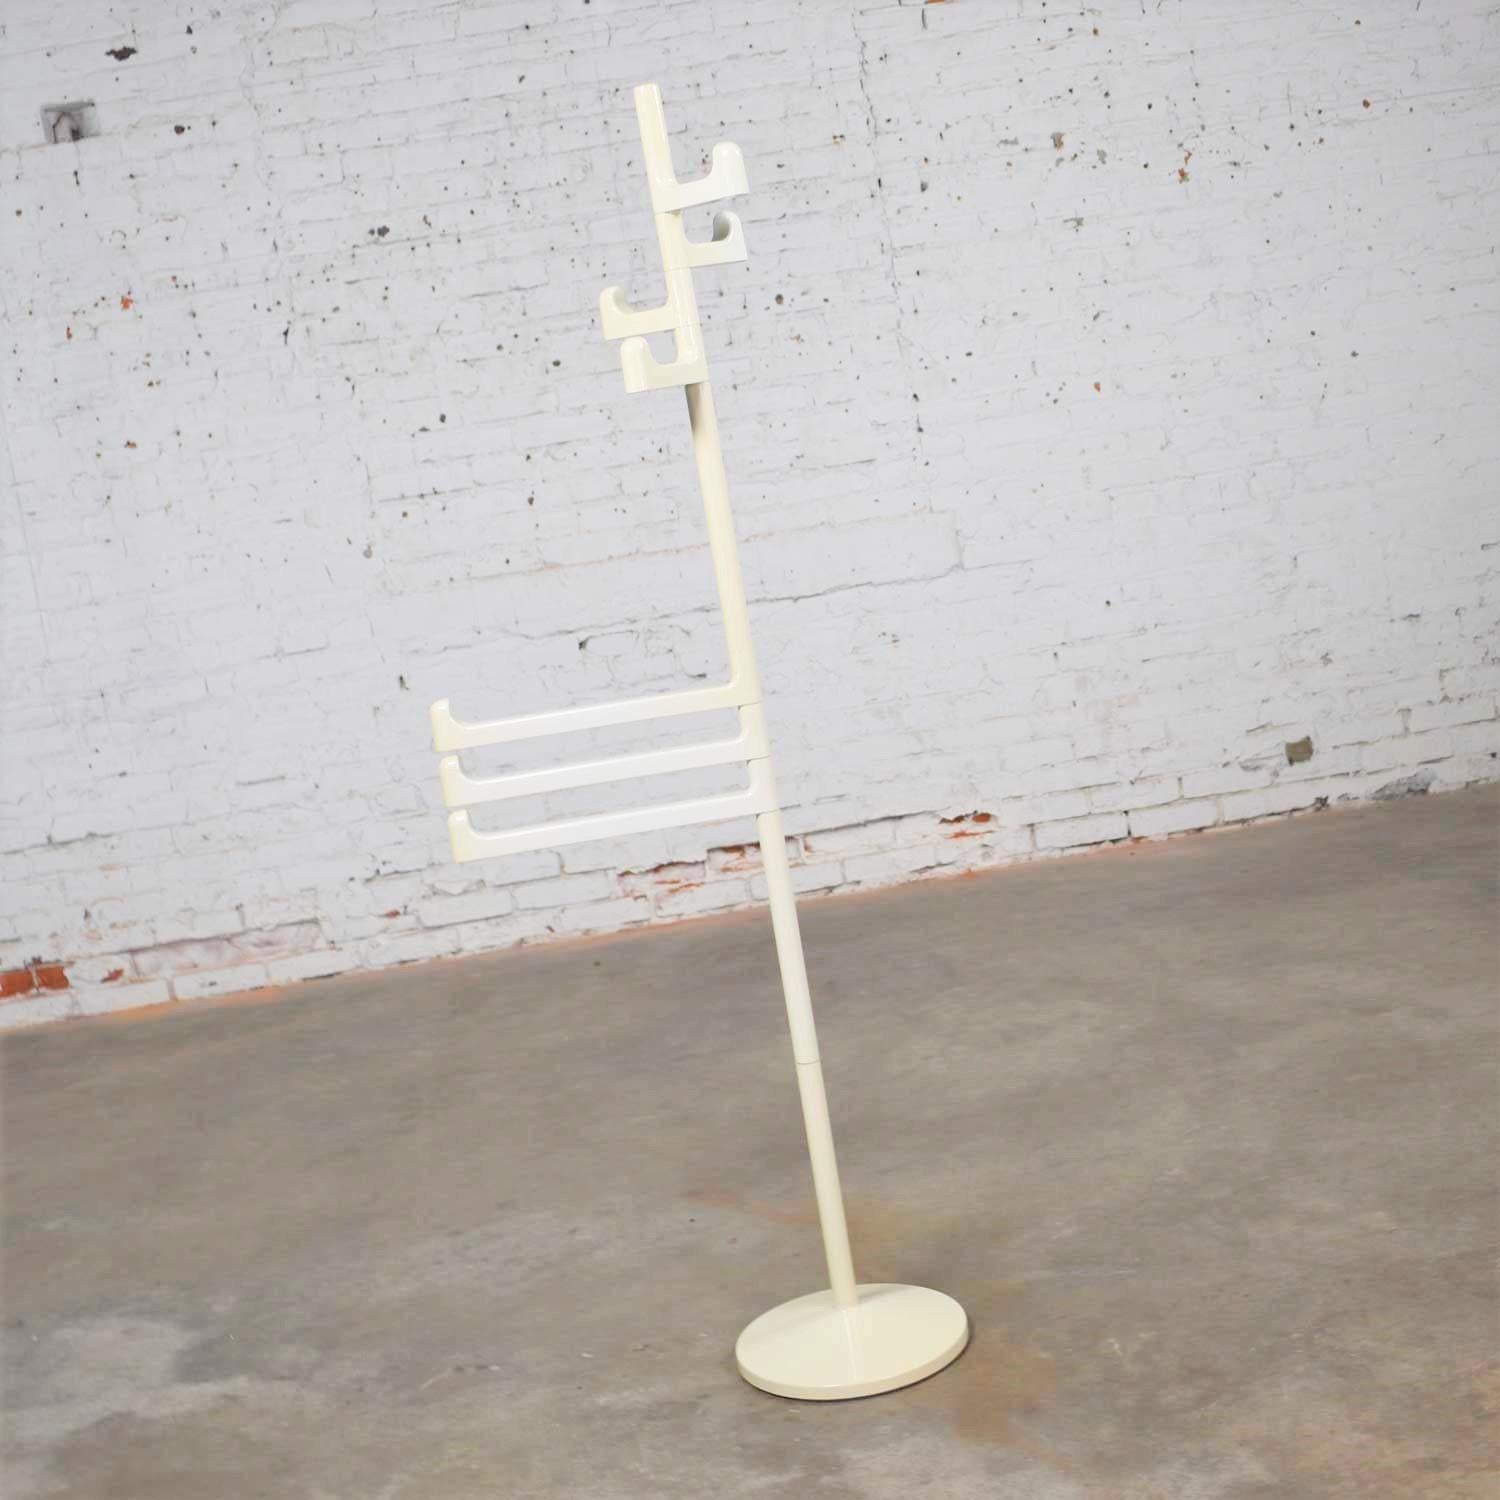 Handsome Italian towel rack or coat rack in white plastic designed by Makio Hasuike for Gedy. It is in fabulous vintage condition. And, I didn’t think there were any flaws but after viewing the photos it looks like there is a bit of discoloration or